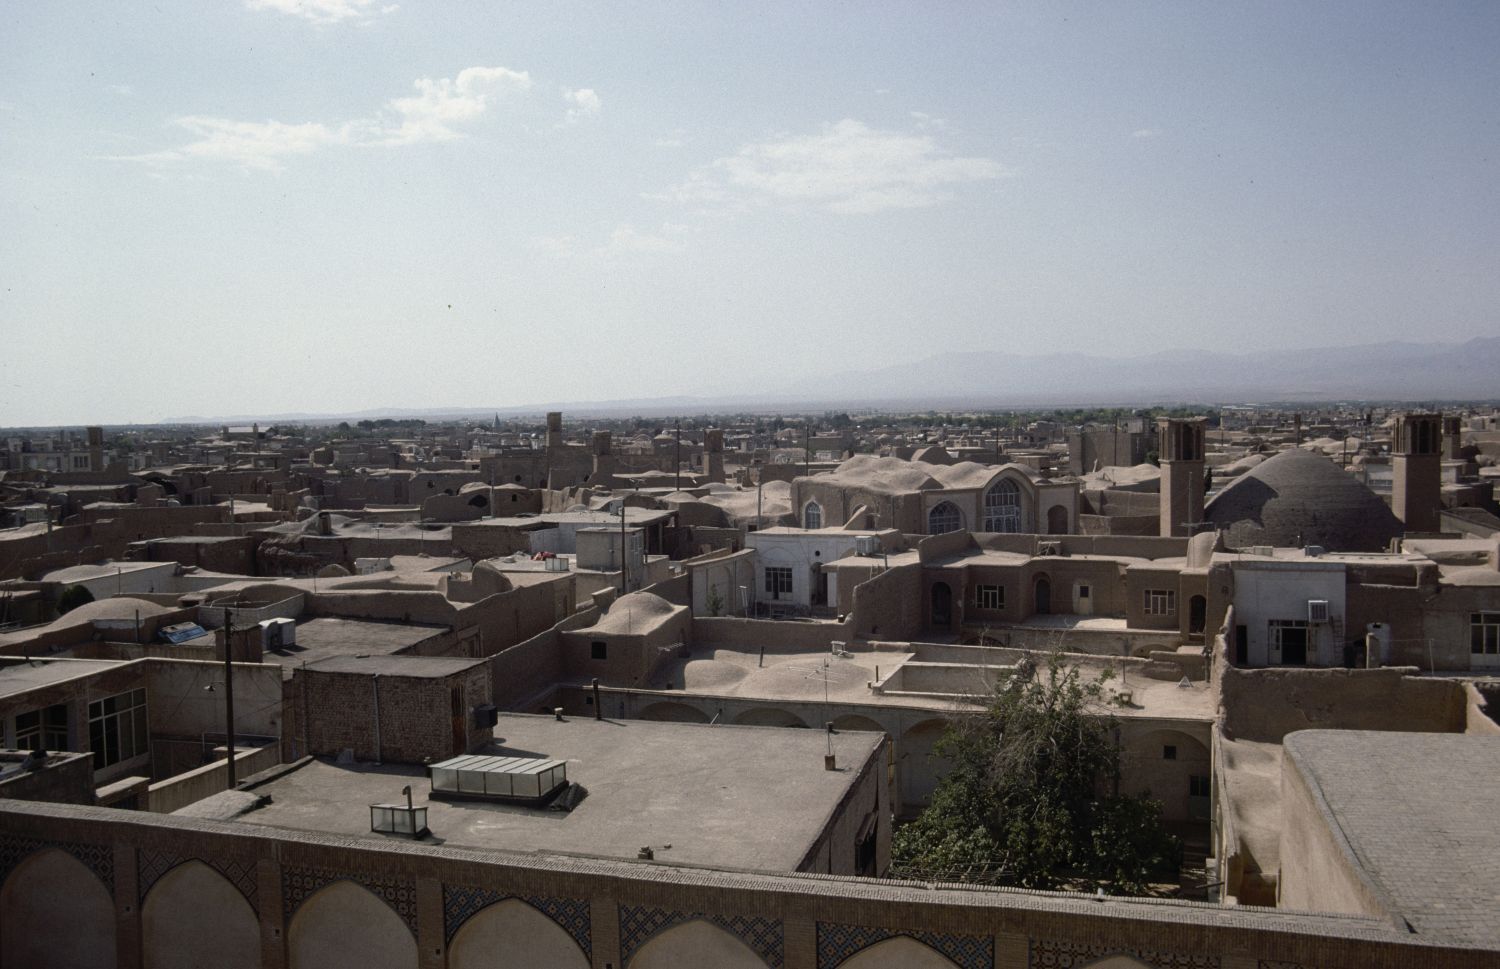 View over old city of Kashan, Iran, facing south. Taken from roof of&nbsp;<a href="https://archnet.org/sites/1625" target="_blank" data-bypass="true">Aqa Buzurg Mosque</a>.